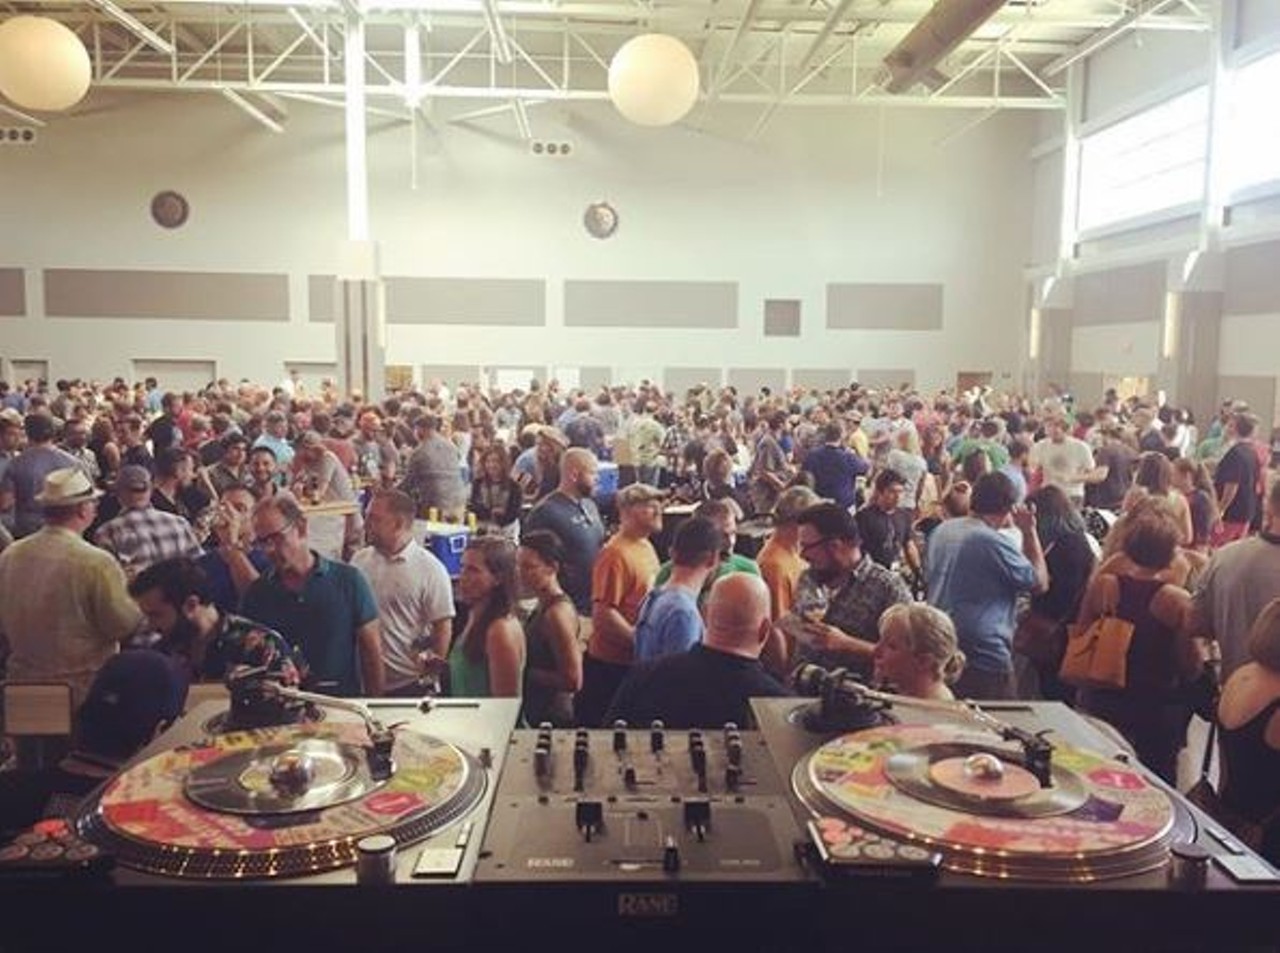 Midwest Belgian Beer Fest
July 28, 2018
St. Louis, MO
Perennial Artisan Ales has never let beer-lovers down and they&#146;re not about to start now. This weekend they&#146;re hosting their 7th annual Midwest Belgian Beer Fest. This huge event isn&#146;t just any ol&#146; beer fest; this thing is a high-energy libation party zone. Arrive prepared to make some new friends. Tickets are $65 but all profits from the festival are donated to sarcoma research through The Foundation for Barnes Jewish Hospital. So you practically have to drink. For charity.
Photo courtesy of djmakossa / Instagram
Find more information about the event here.